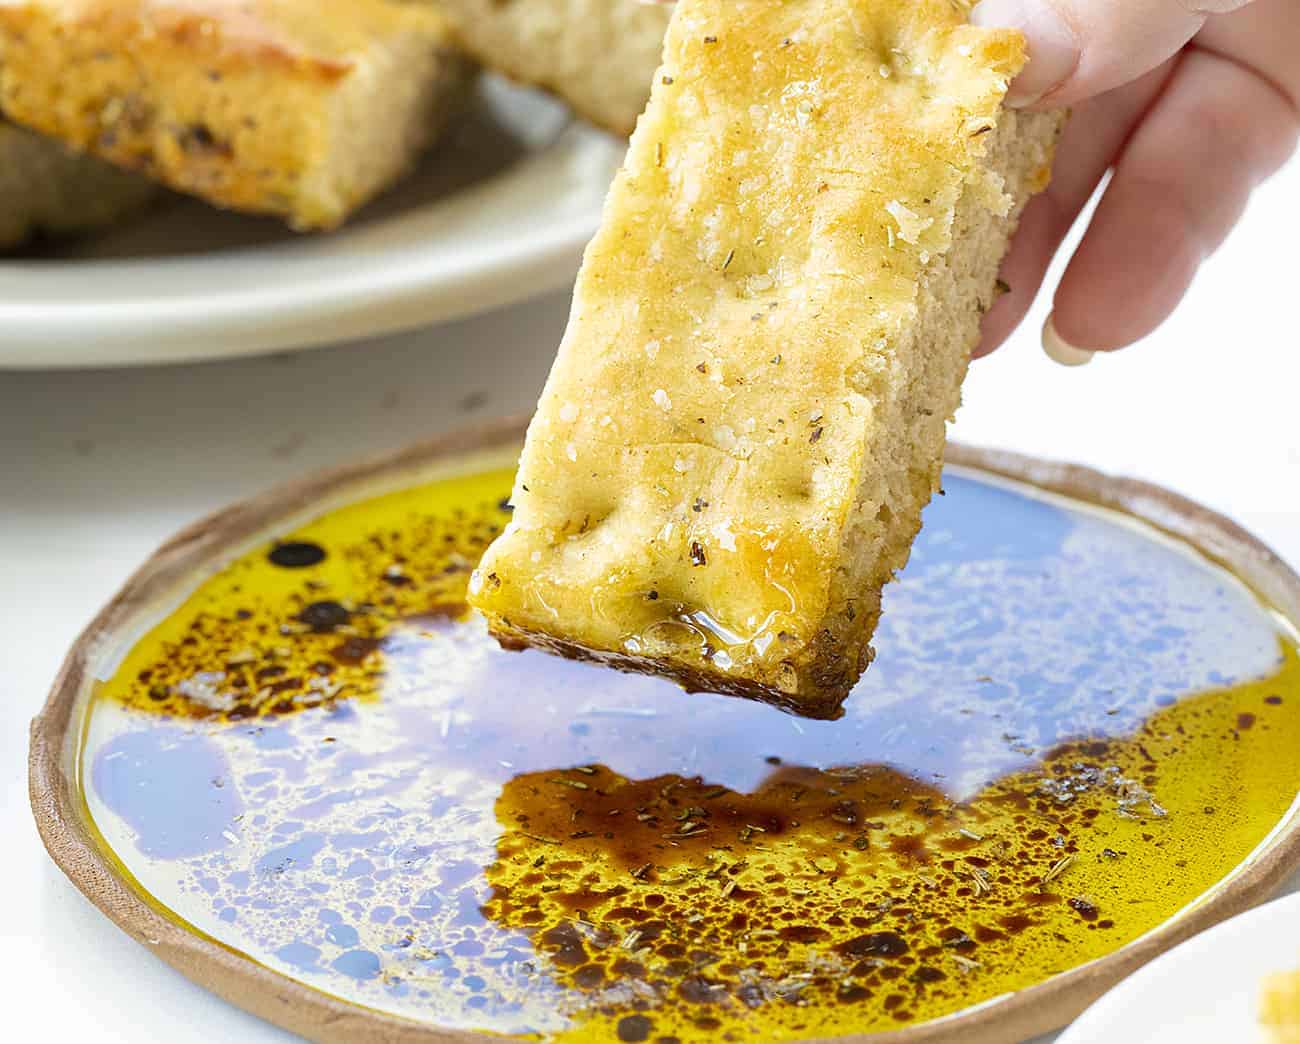 Dipping Piece of Focaccia Bread into Oil and Balsamic Vinegar